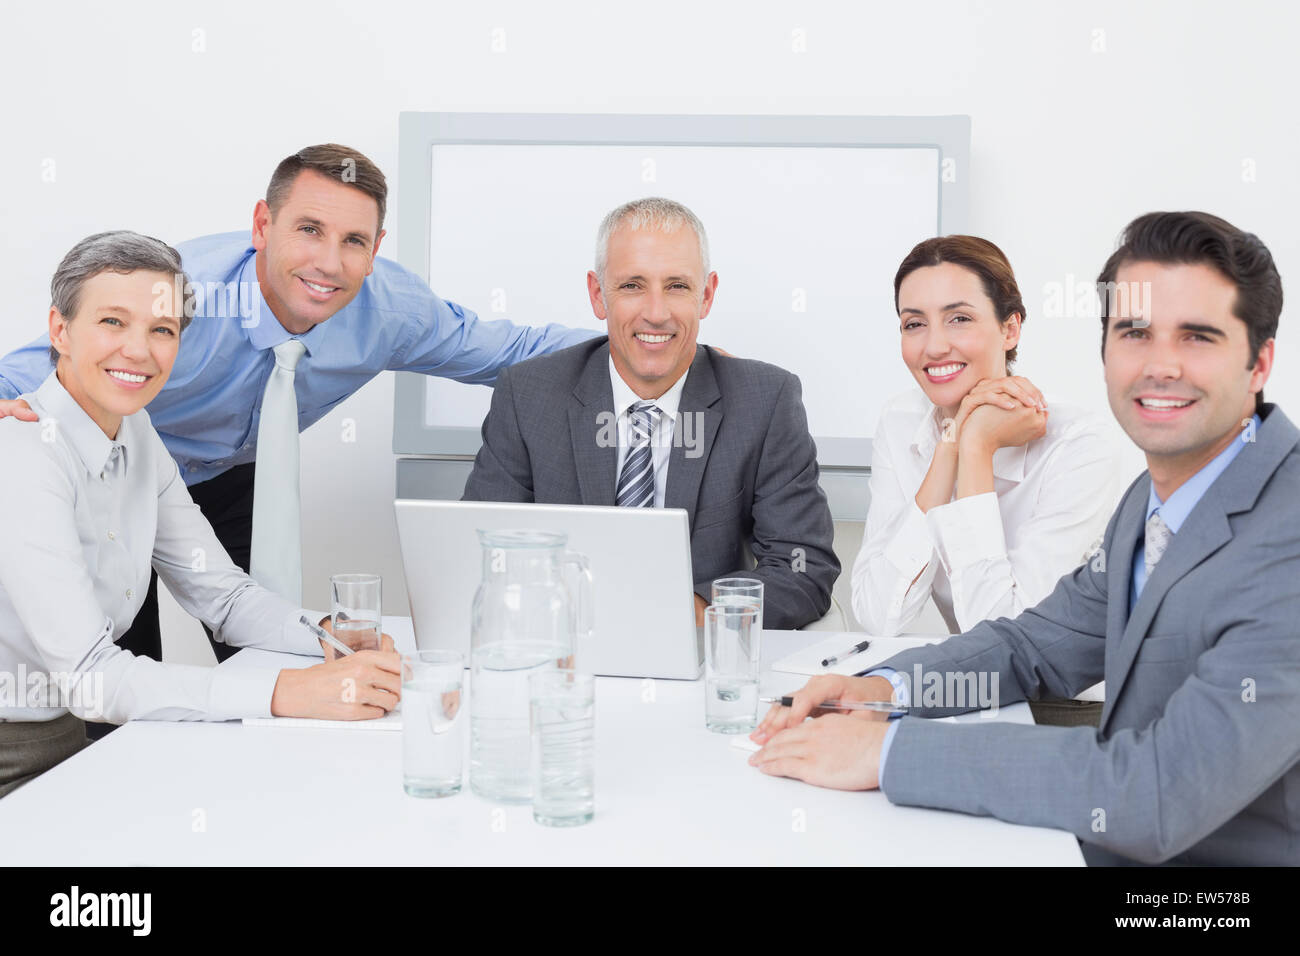 Business team working happily together on laptop Stock Photo